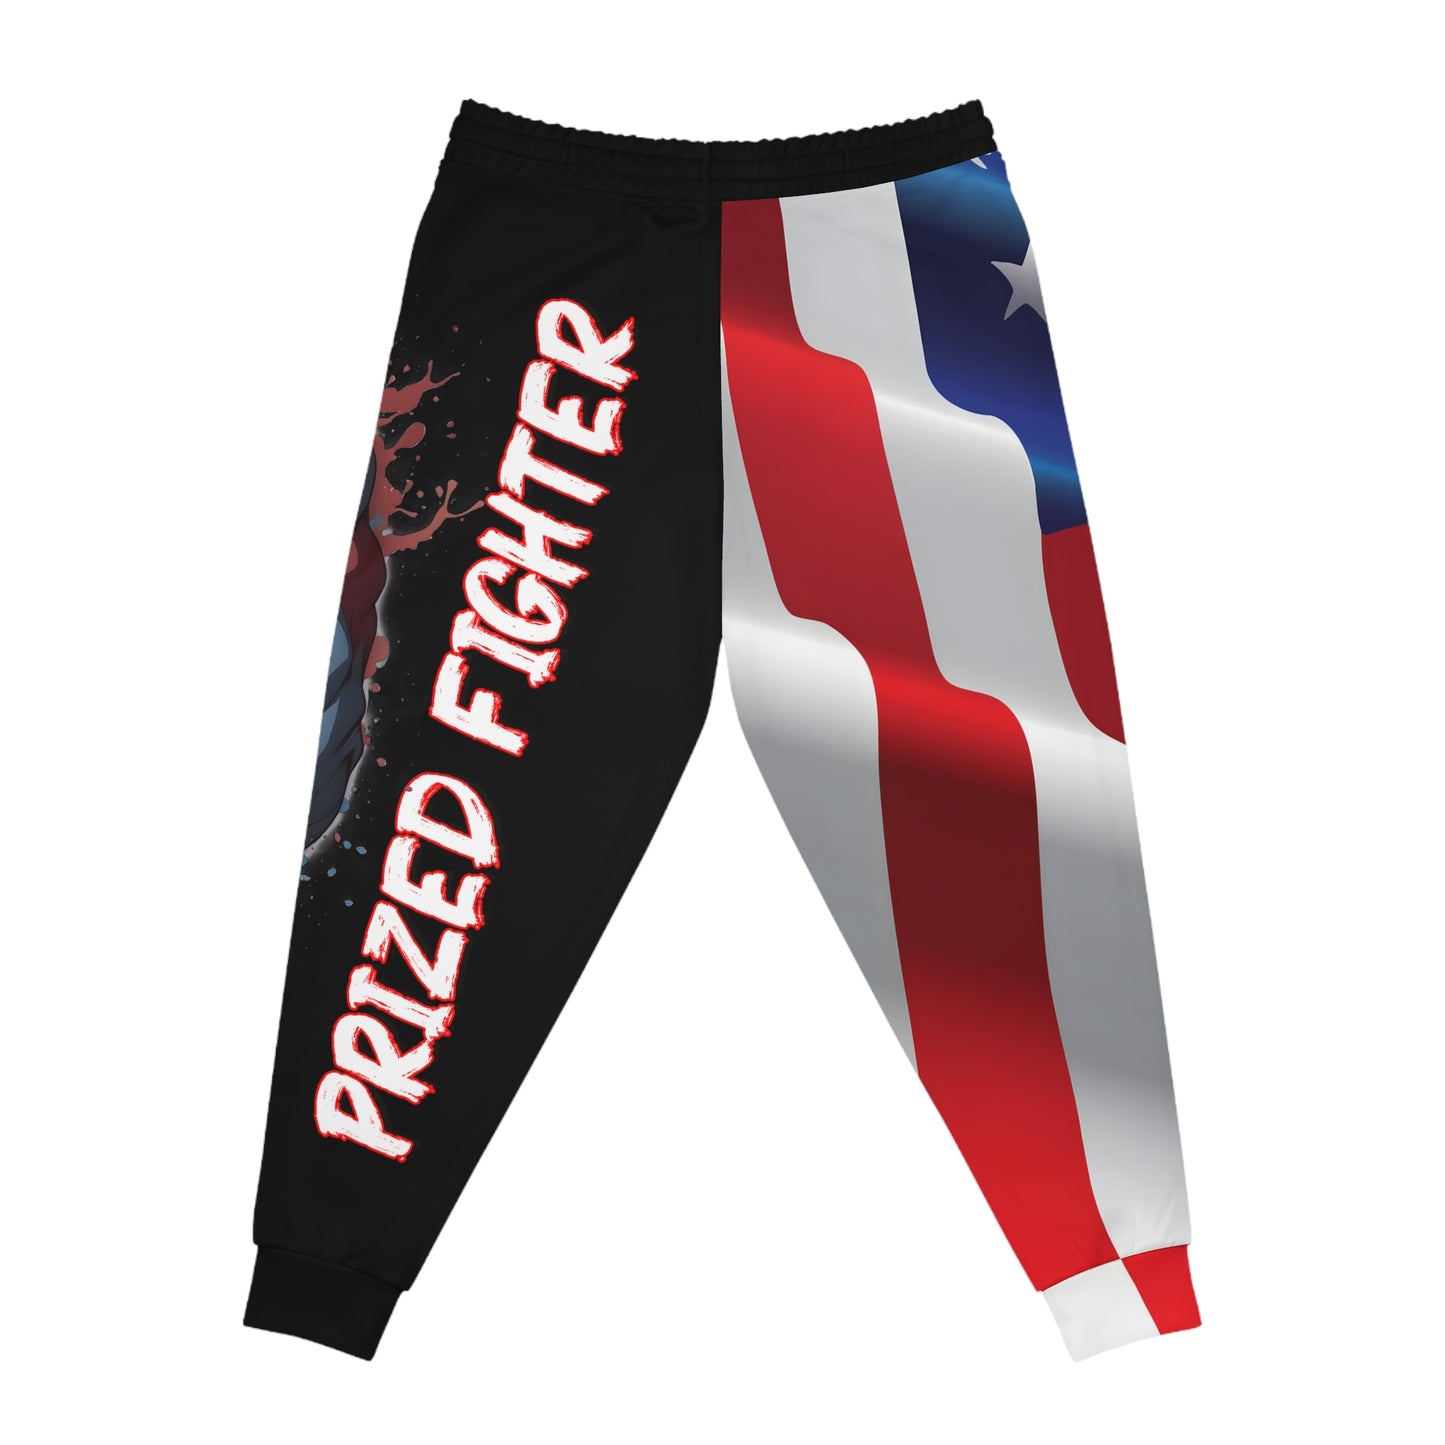 Kǎtōng Piàn - Prized Fighter Collection - America - 002 - Athletic Joggers